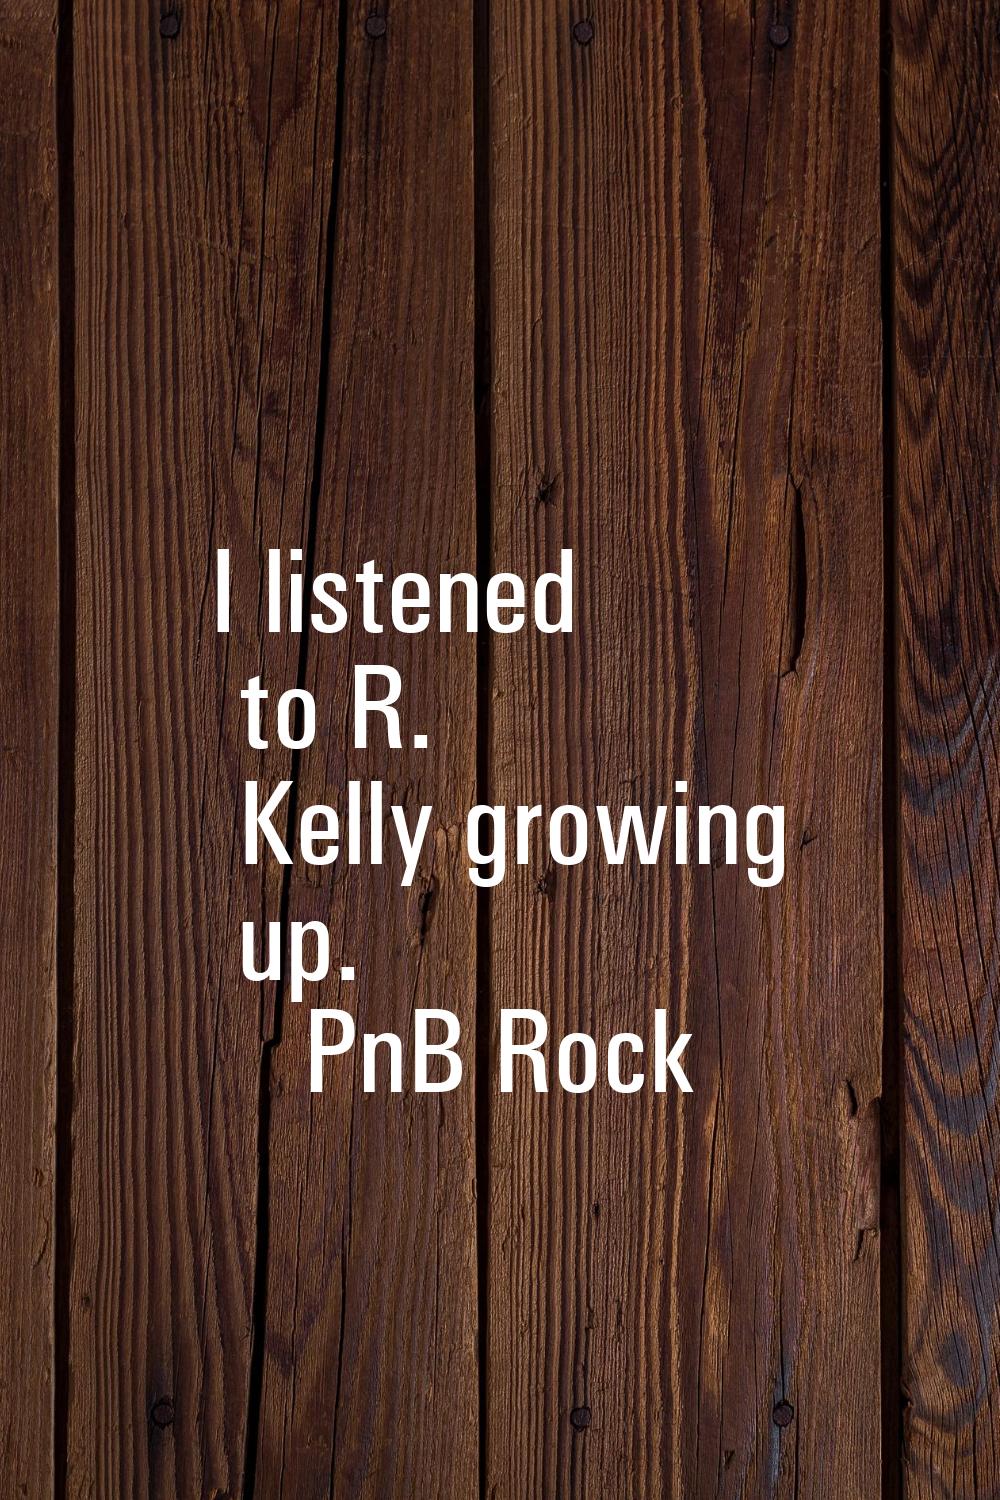 I listened to R. Kelly growing up.